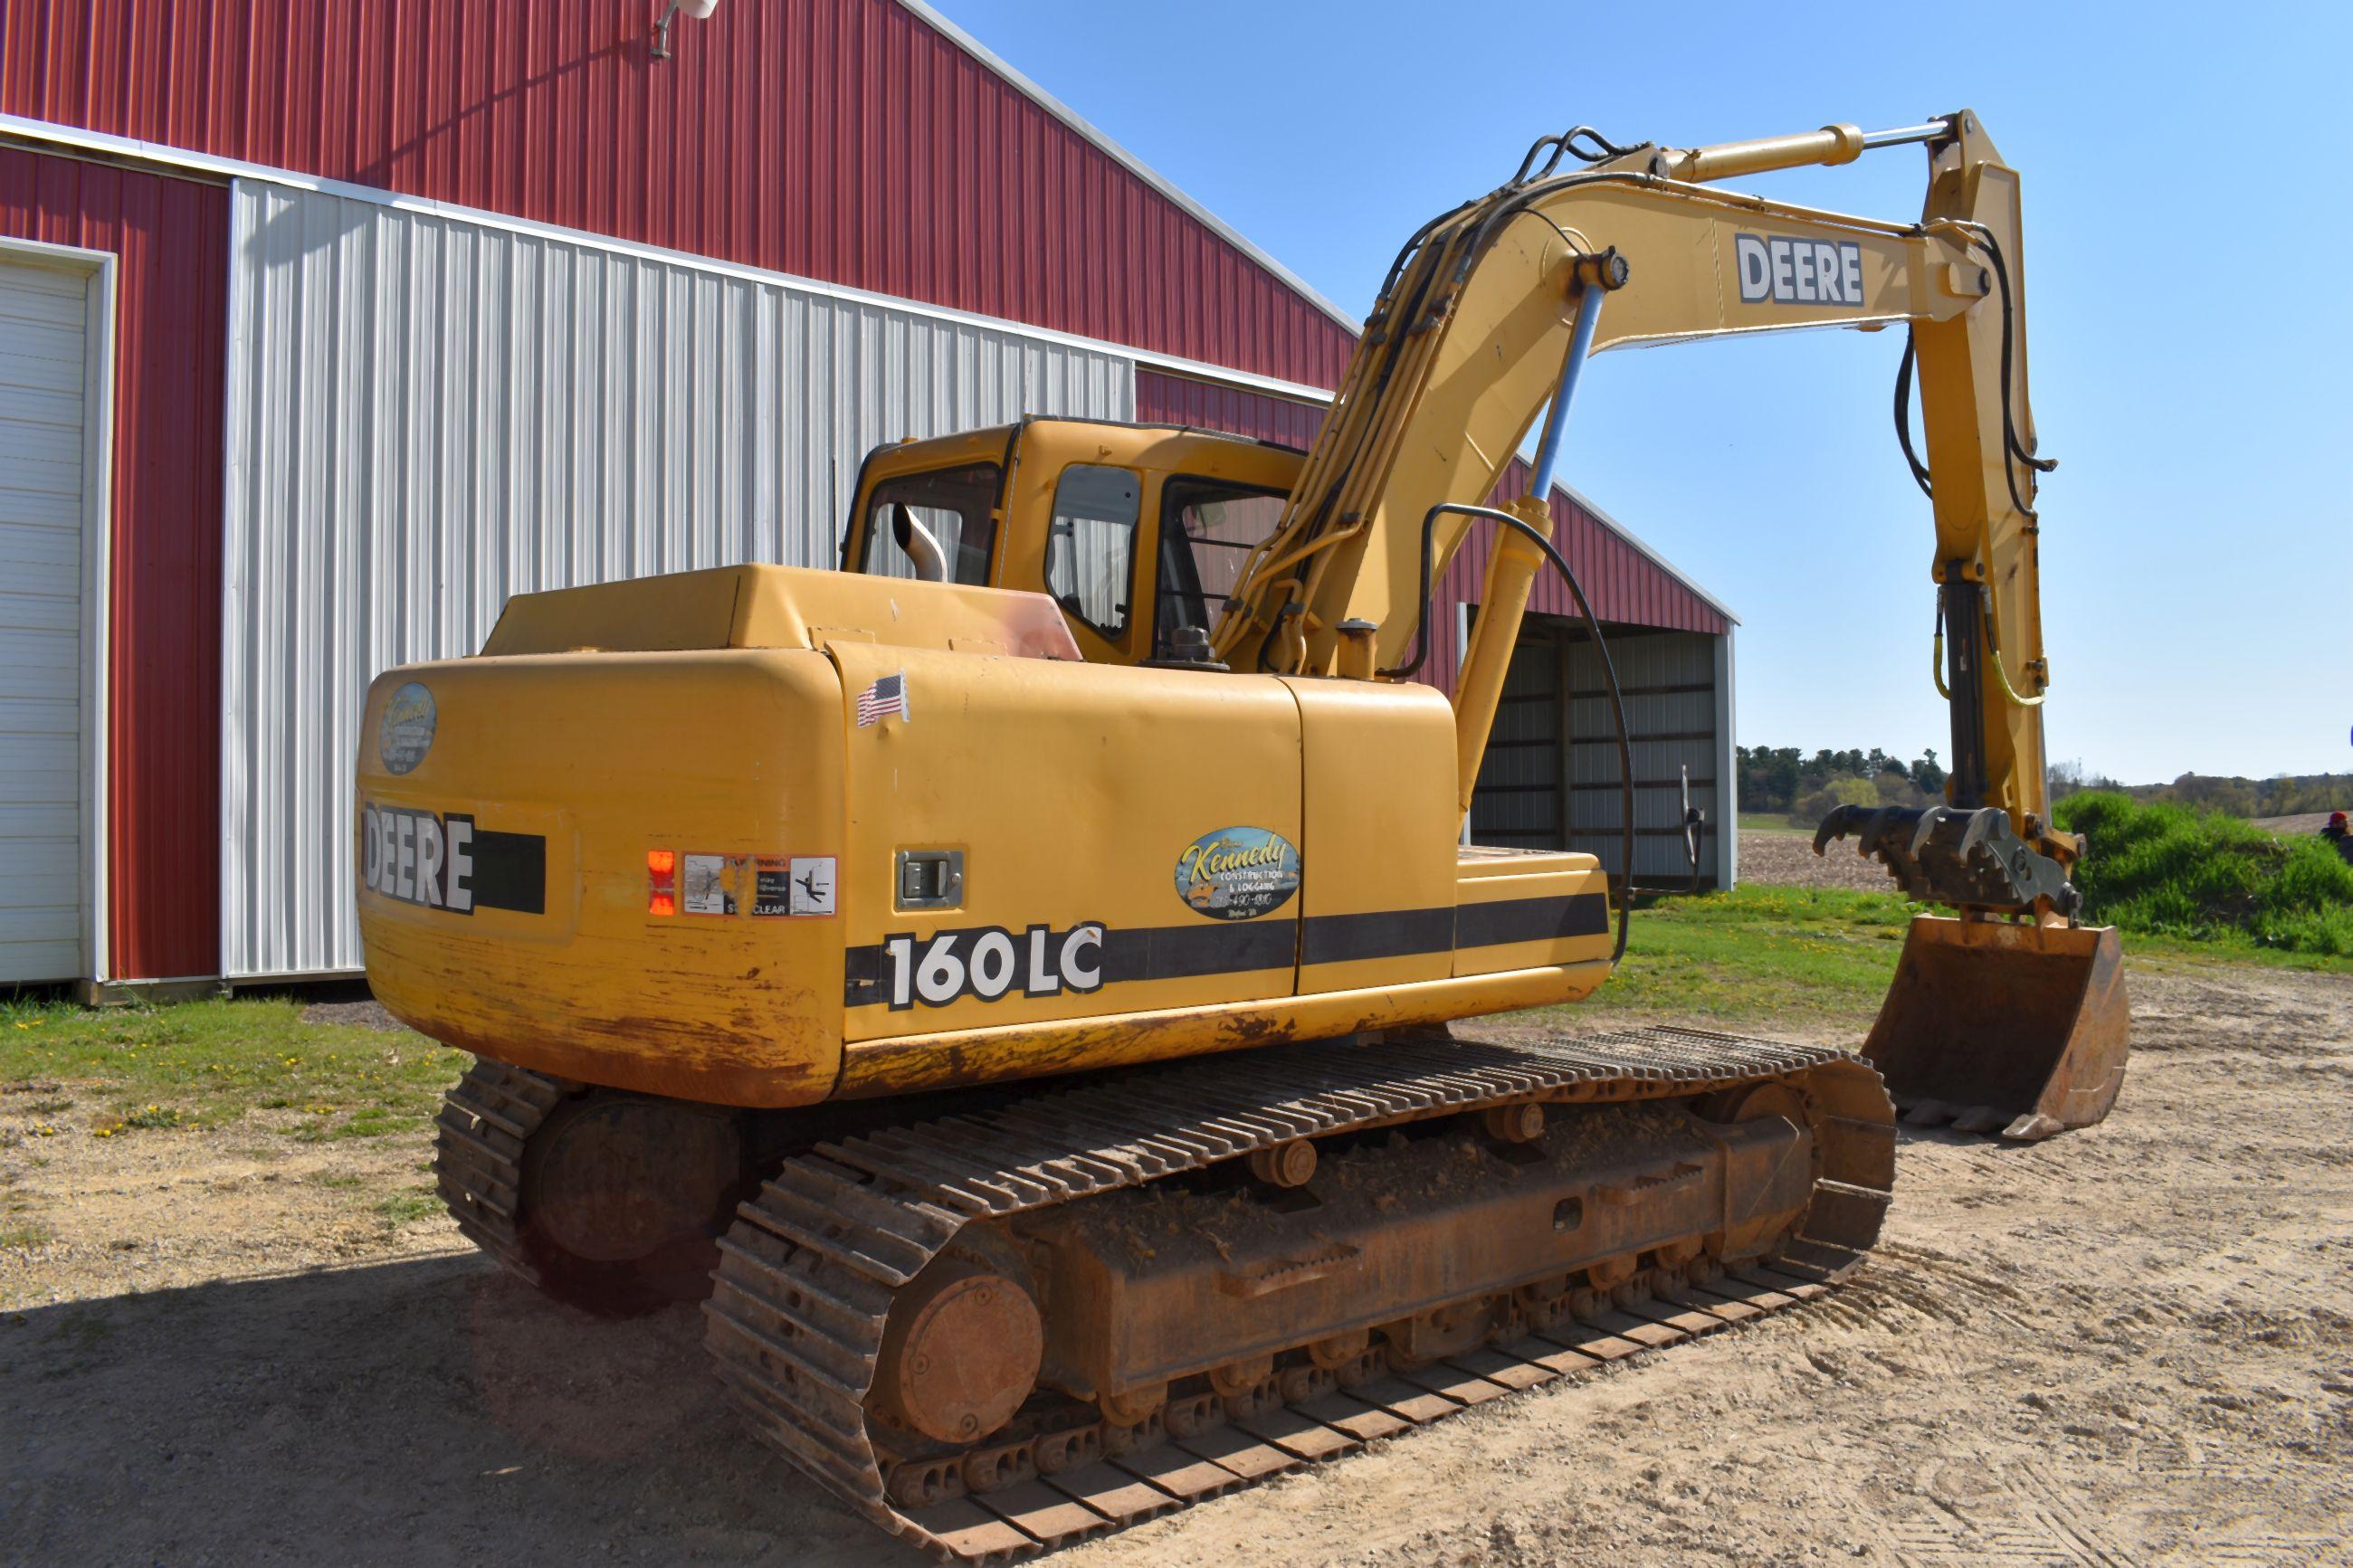 2002 John Deere 160LC Excavator, Enclosed Cab, 28” Pads, 40” Dirt Bucket With Hydraulic Thumb, New C